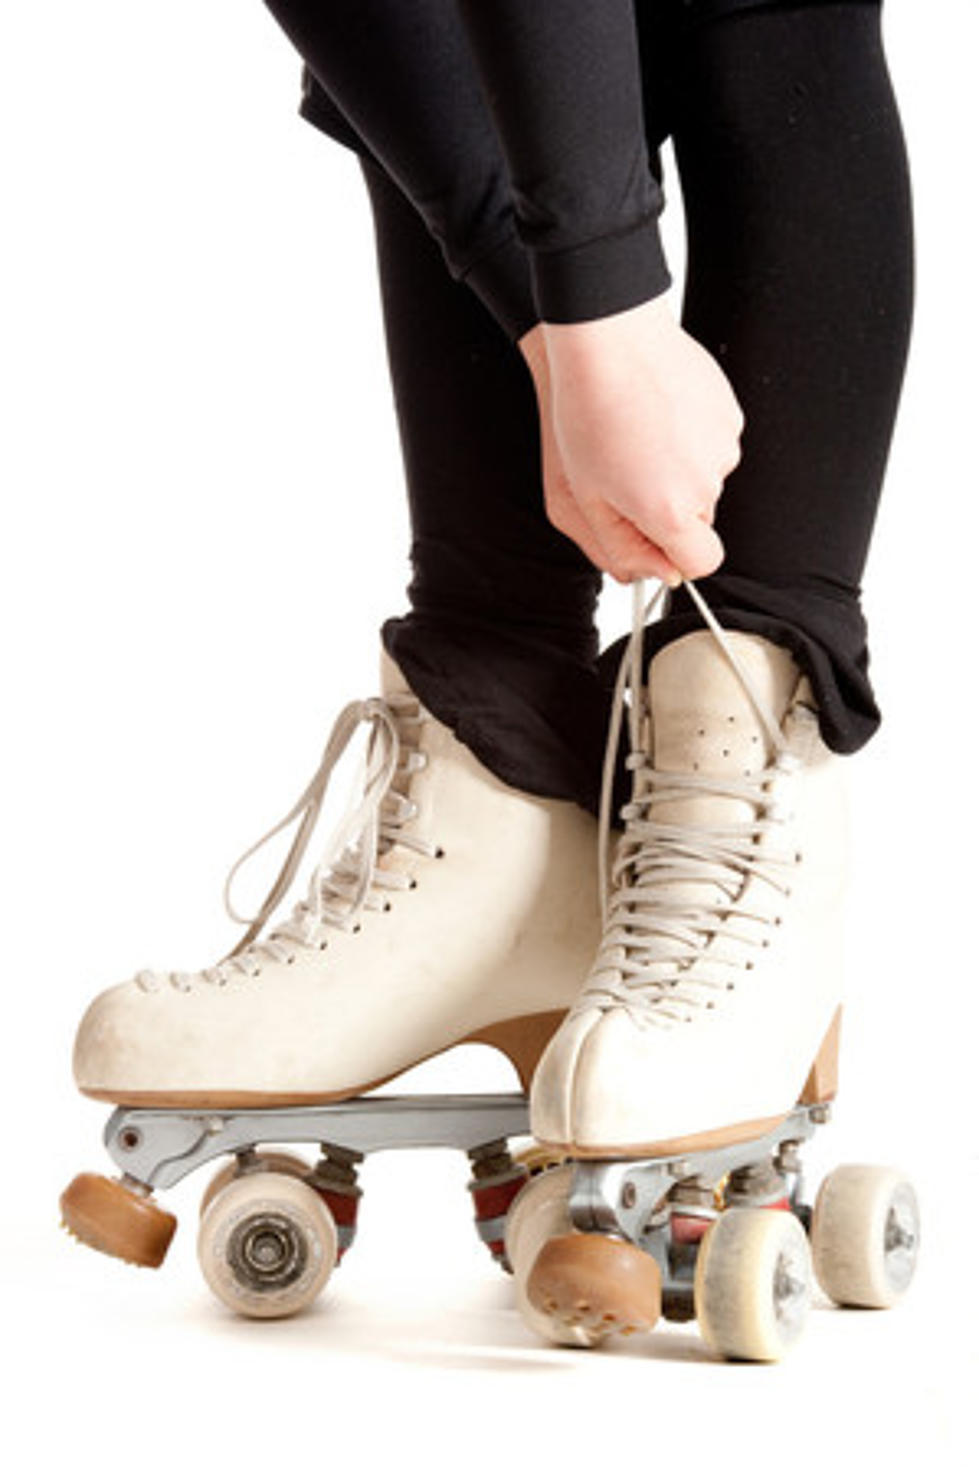 A grand opening date has been set for the new Jackson, NJ skating center